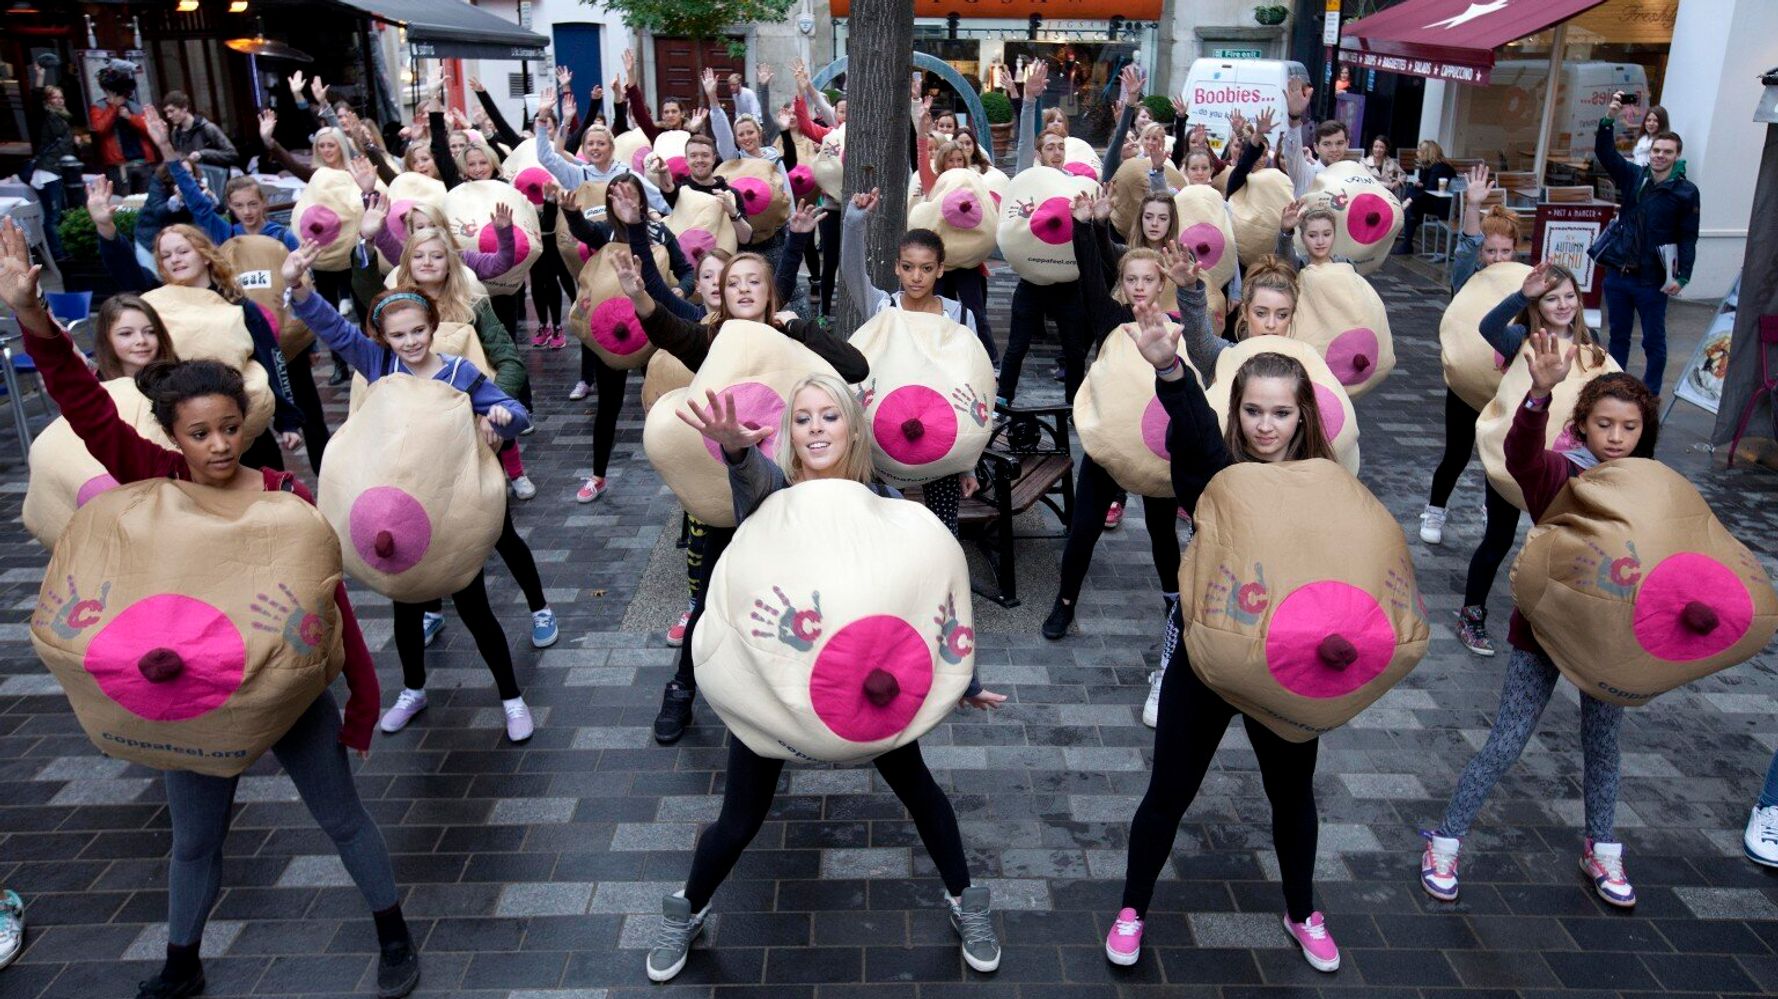 Coppafeel! Breast Cancer Awareness Campaigners Shock With Boobie Flashmob  (VIDEO)